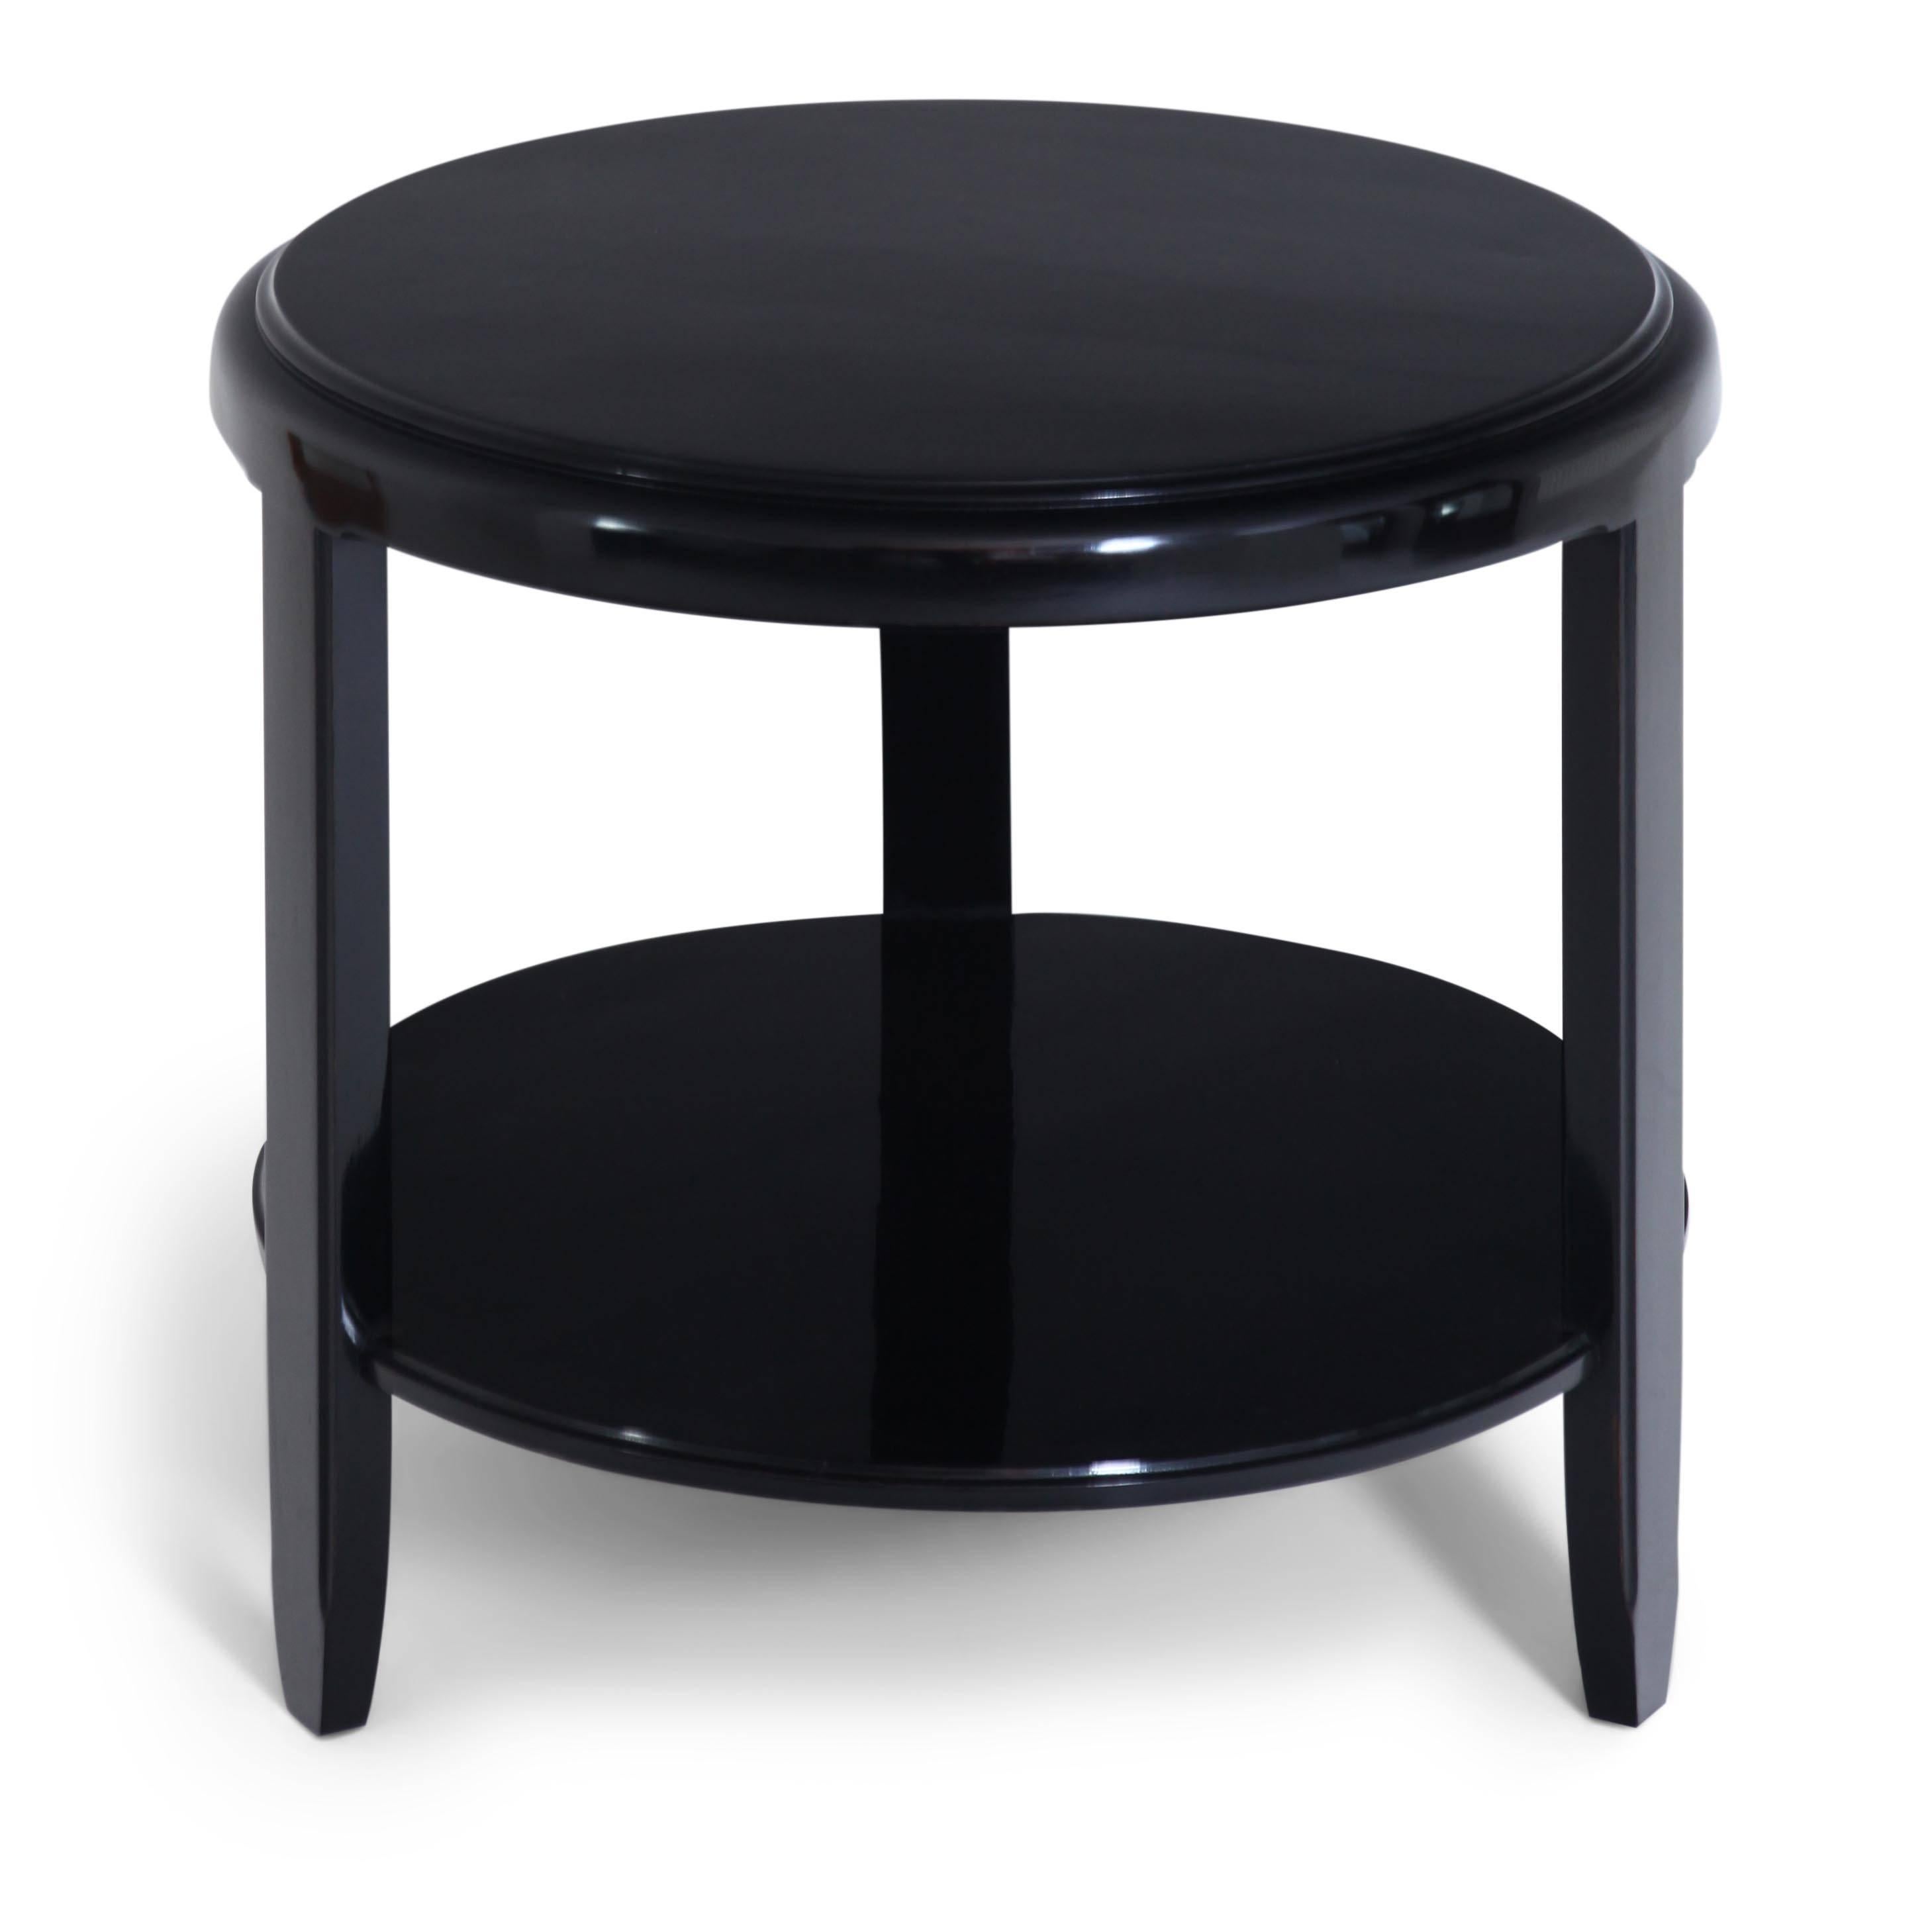 Three-legged ebonized Art Deco side table by Louis Majorelle (1859-1926). The round table is stamped at the bottom. The table was later ebonized.